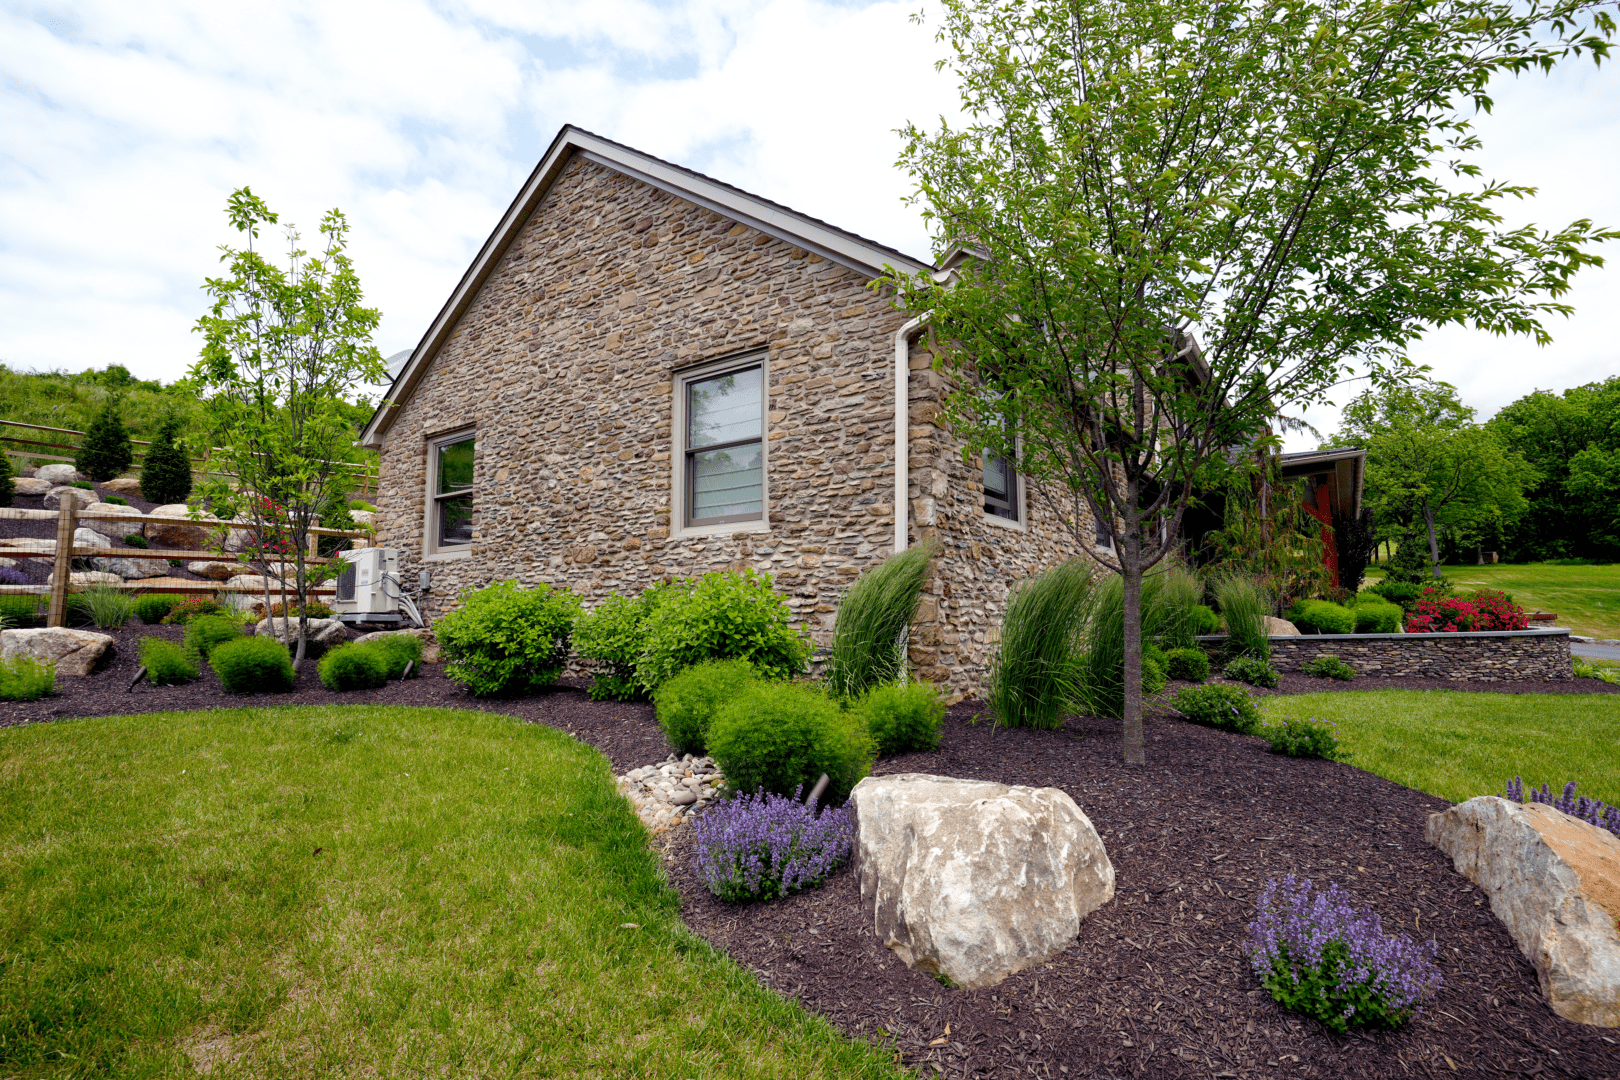 A stone house in a yard expertly landscaped by Planting Professionals.